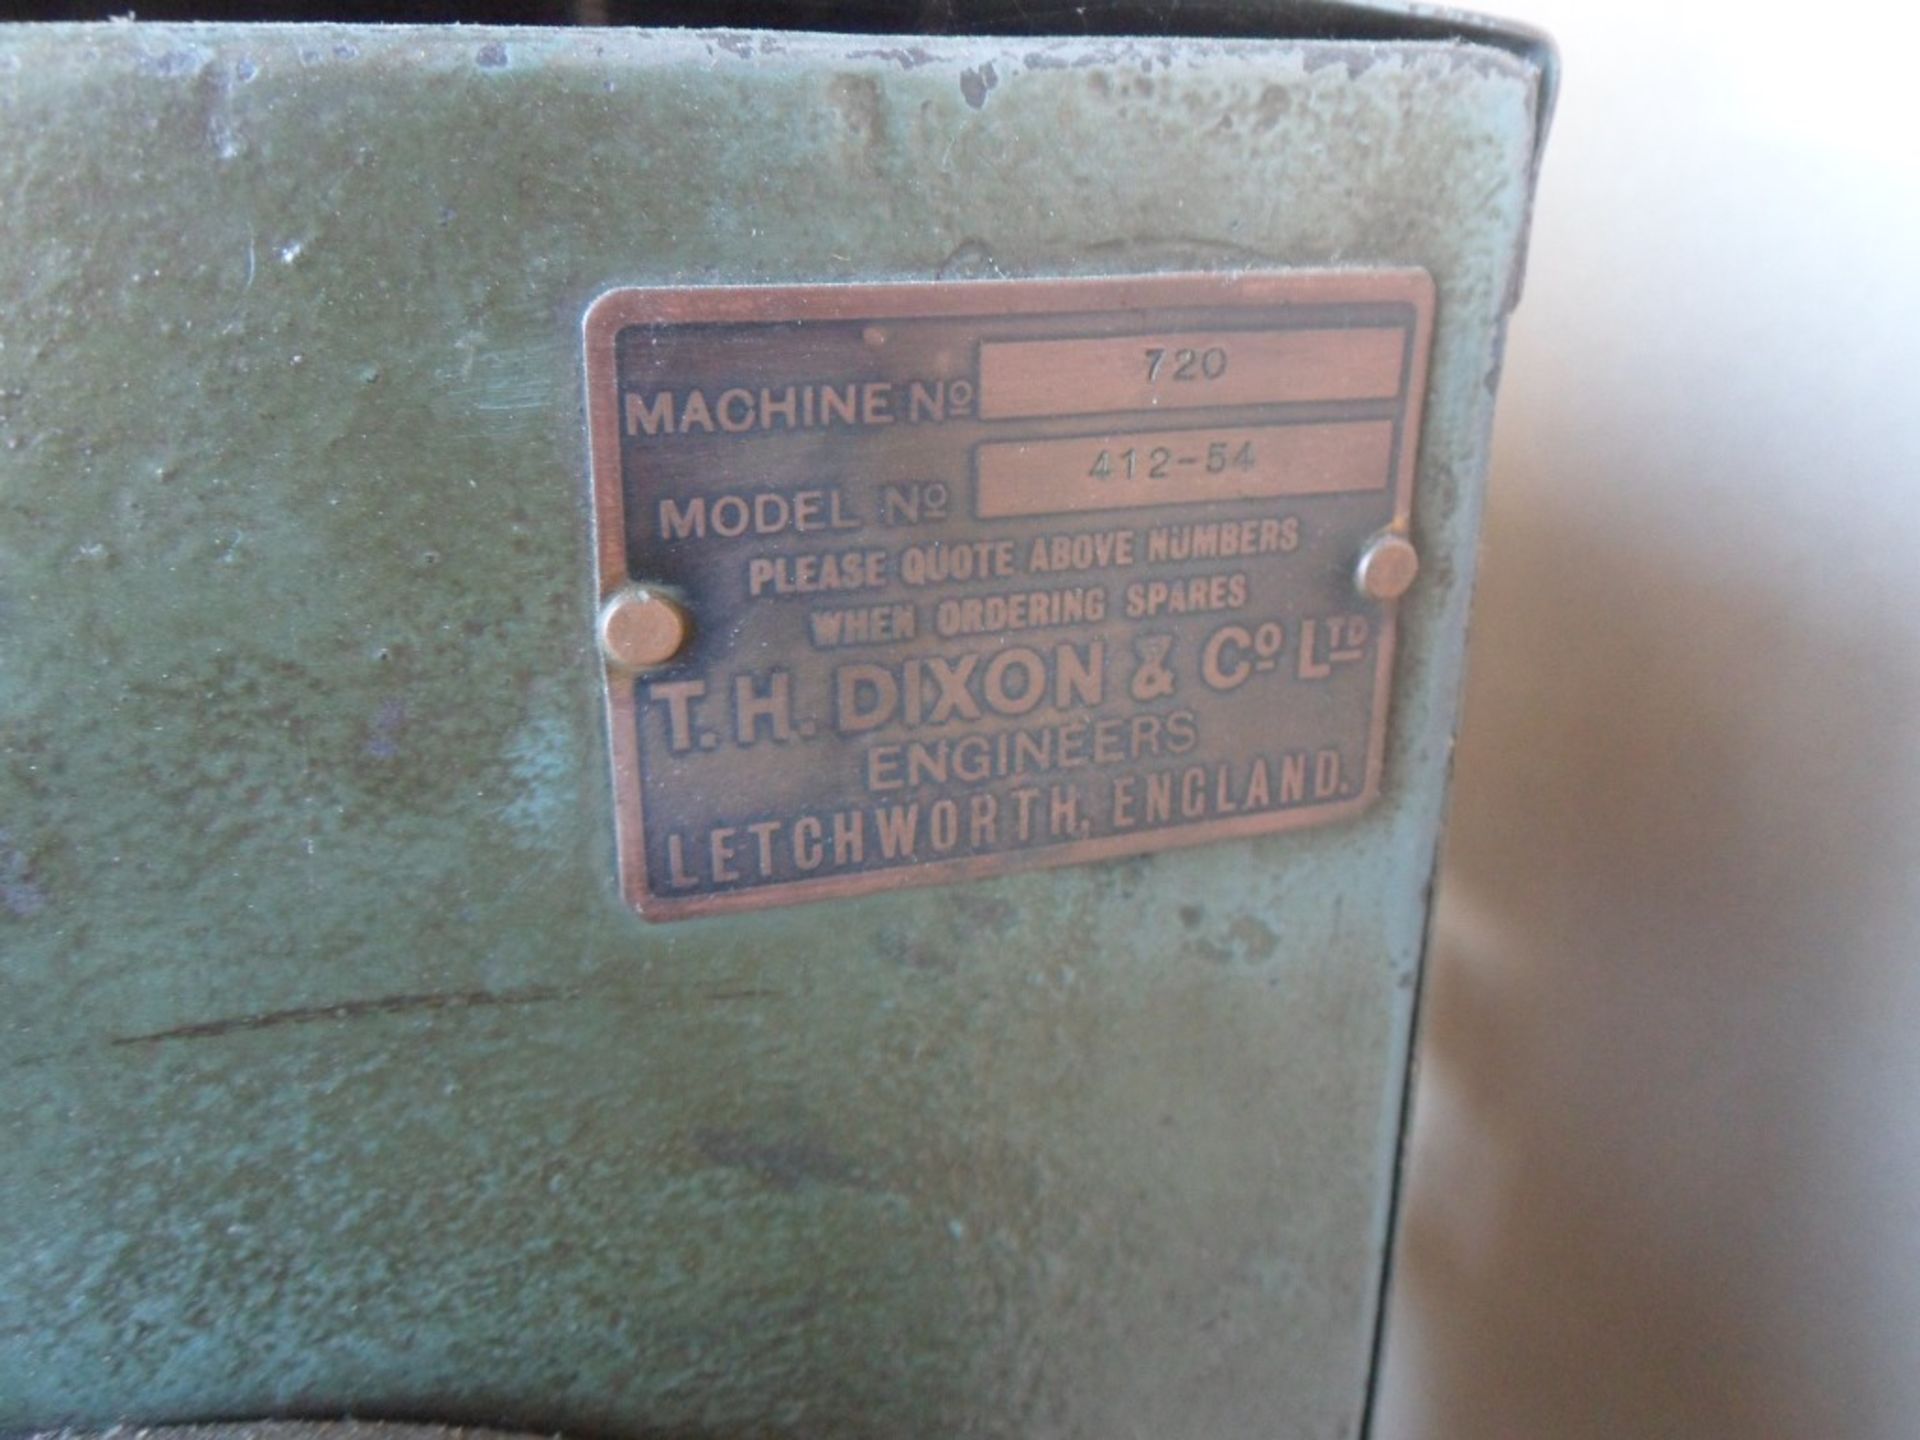 TH Dixon model 412-54 54in wide cloth slitter/cutter, serial no. 72, 440v (located at Falkirk). - Image 2 of 4